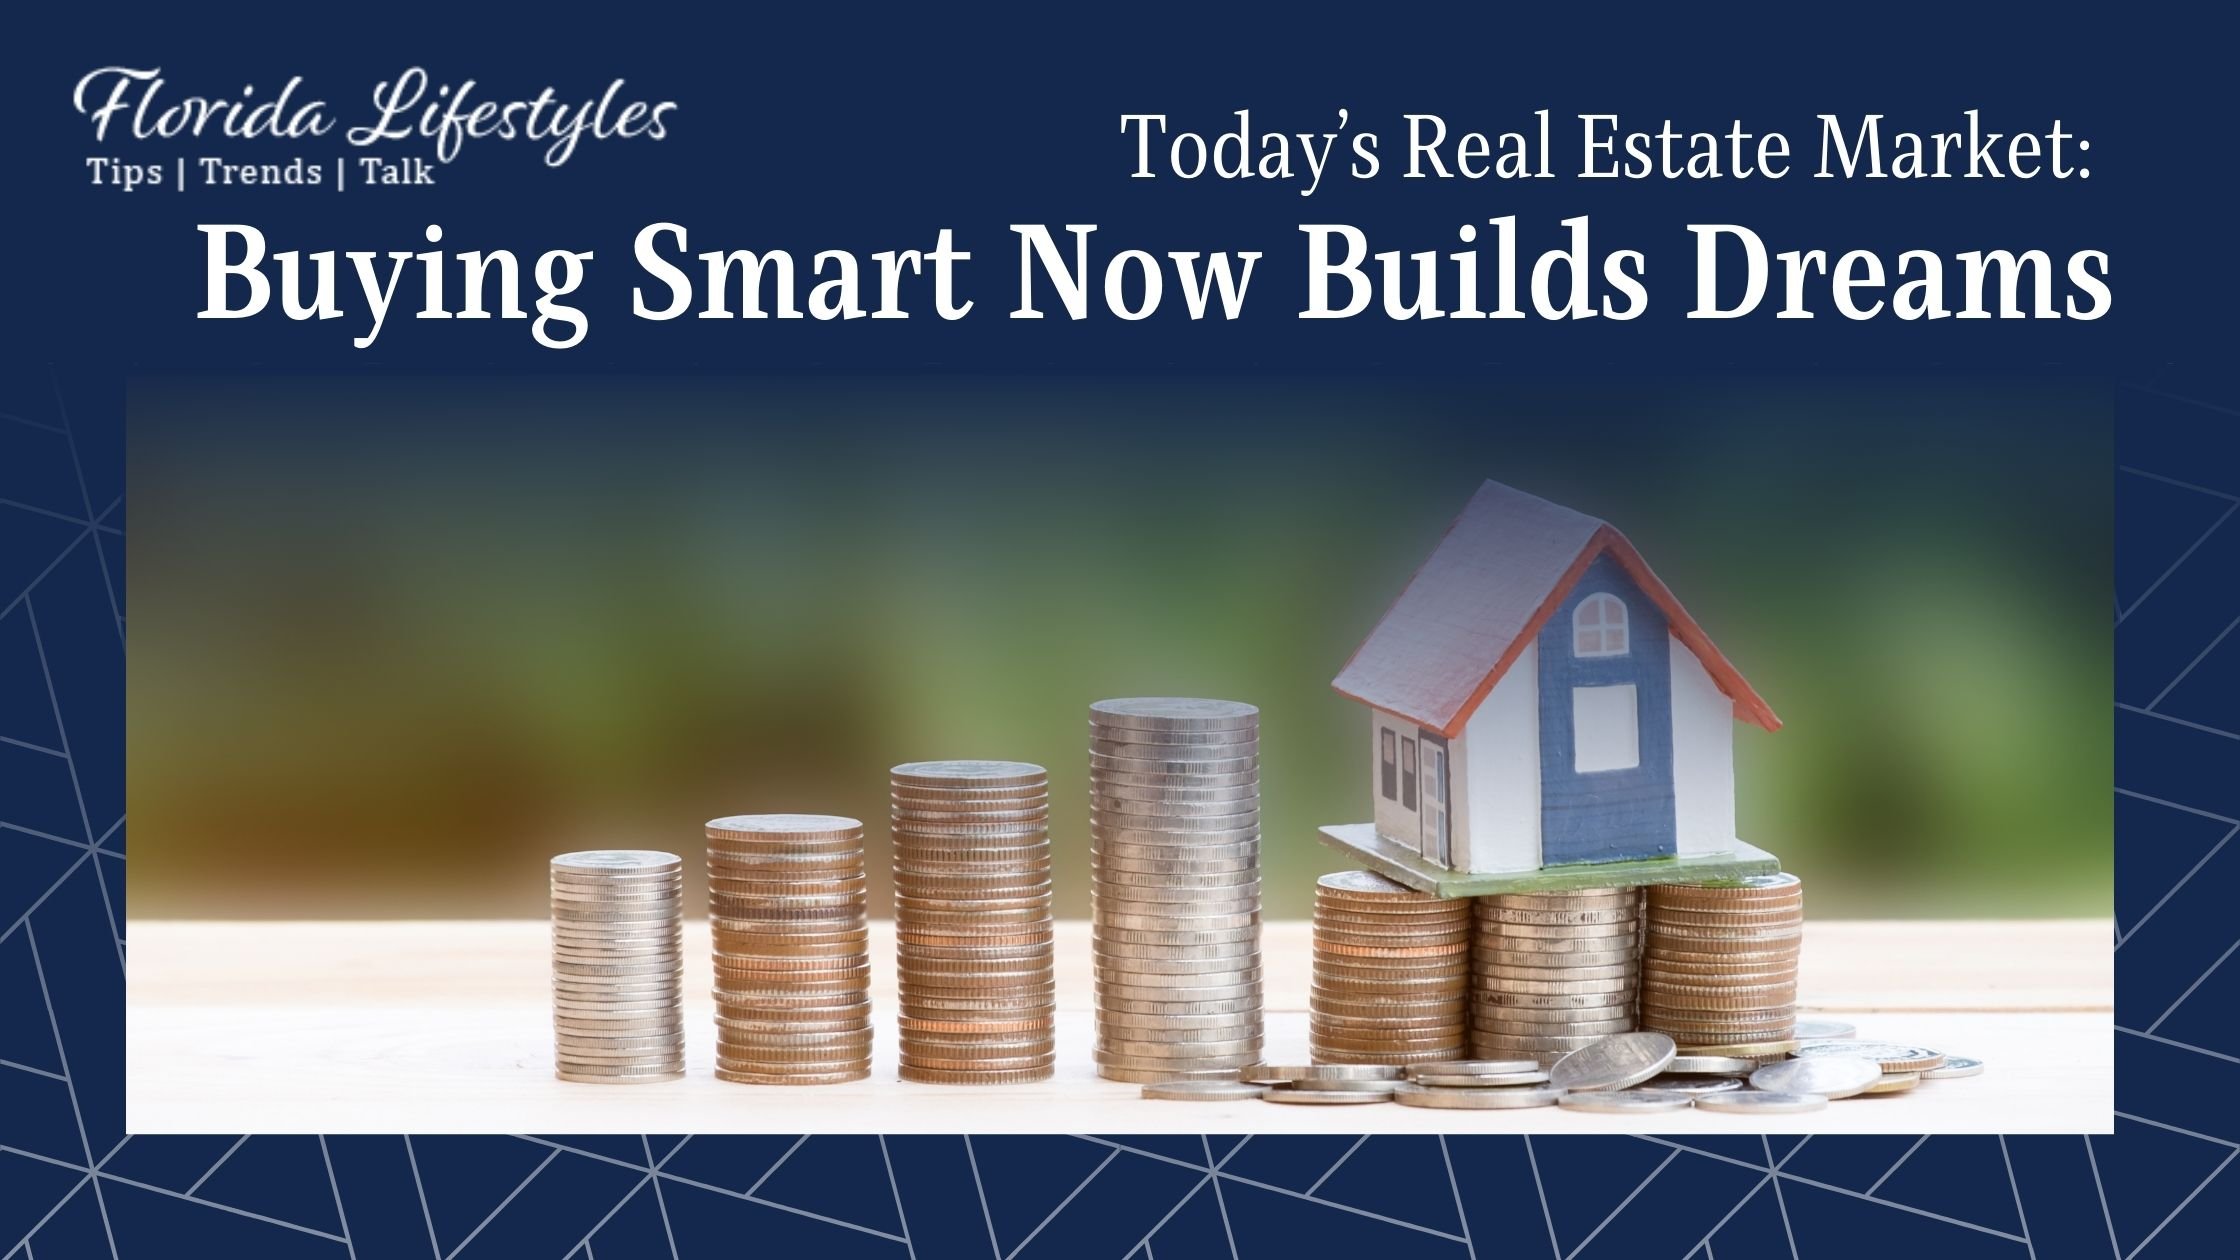 Today’s Real Estate Market: Buying Smart Now Builds Dreams - Blue Luxury Real Estate Blog Banner